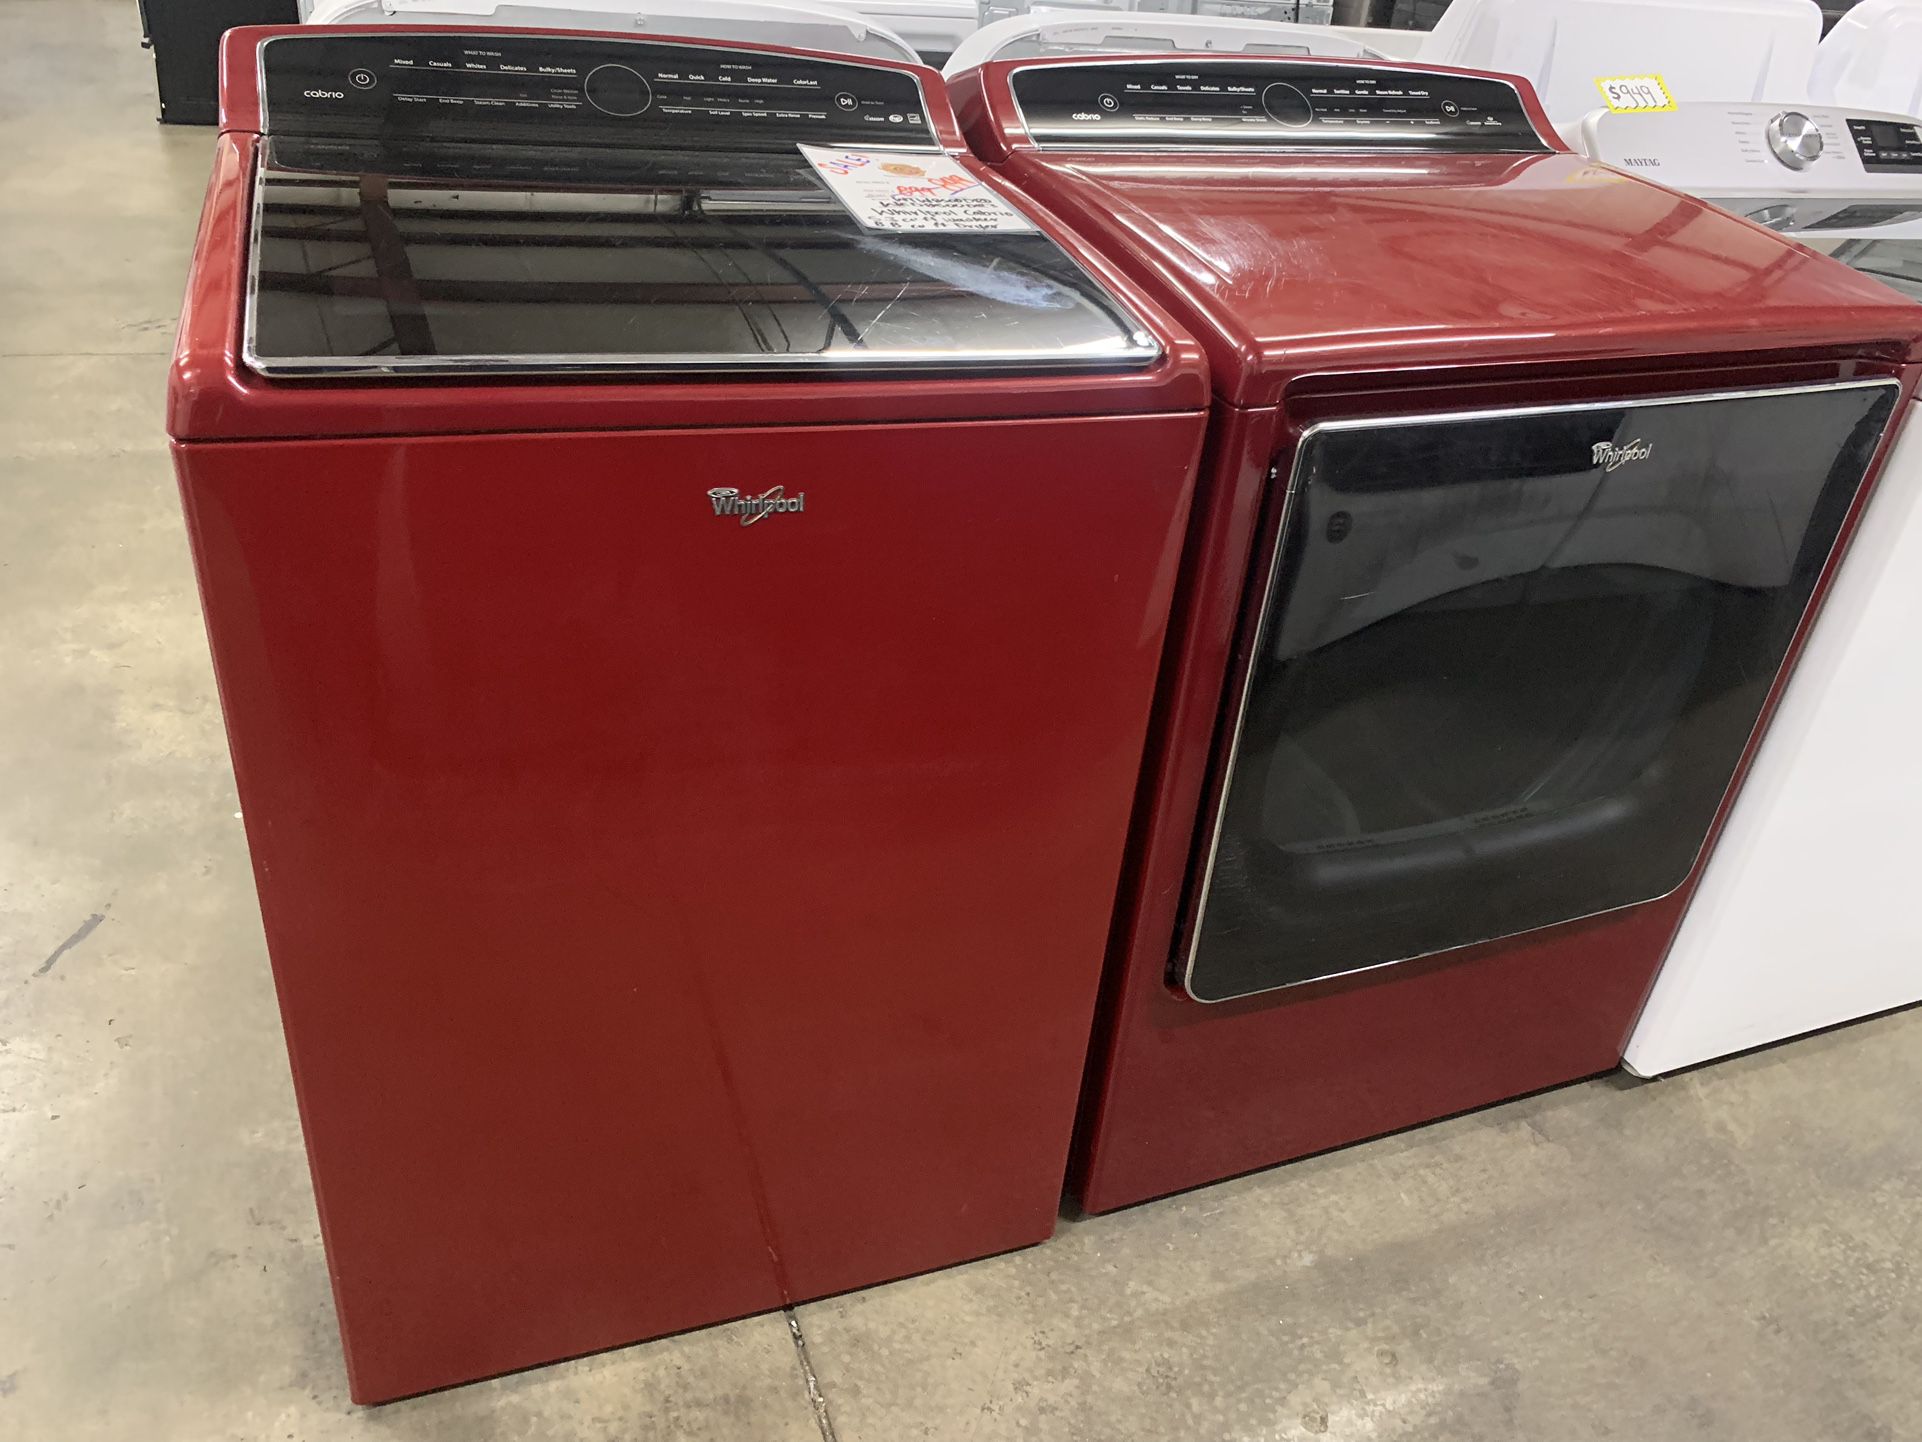 WASHER AND DRYER 